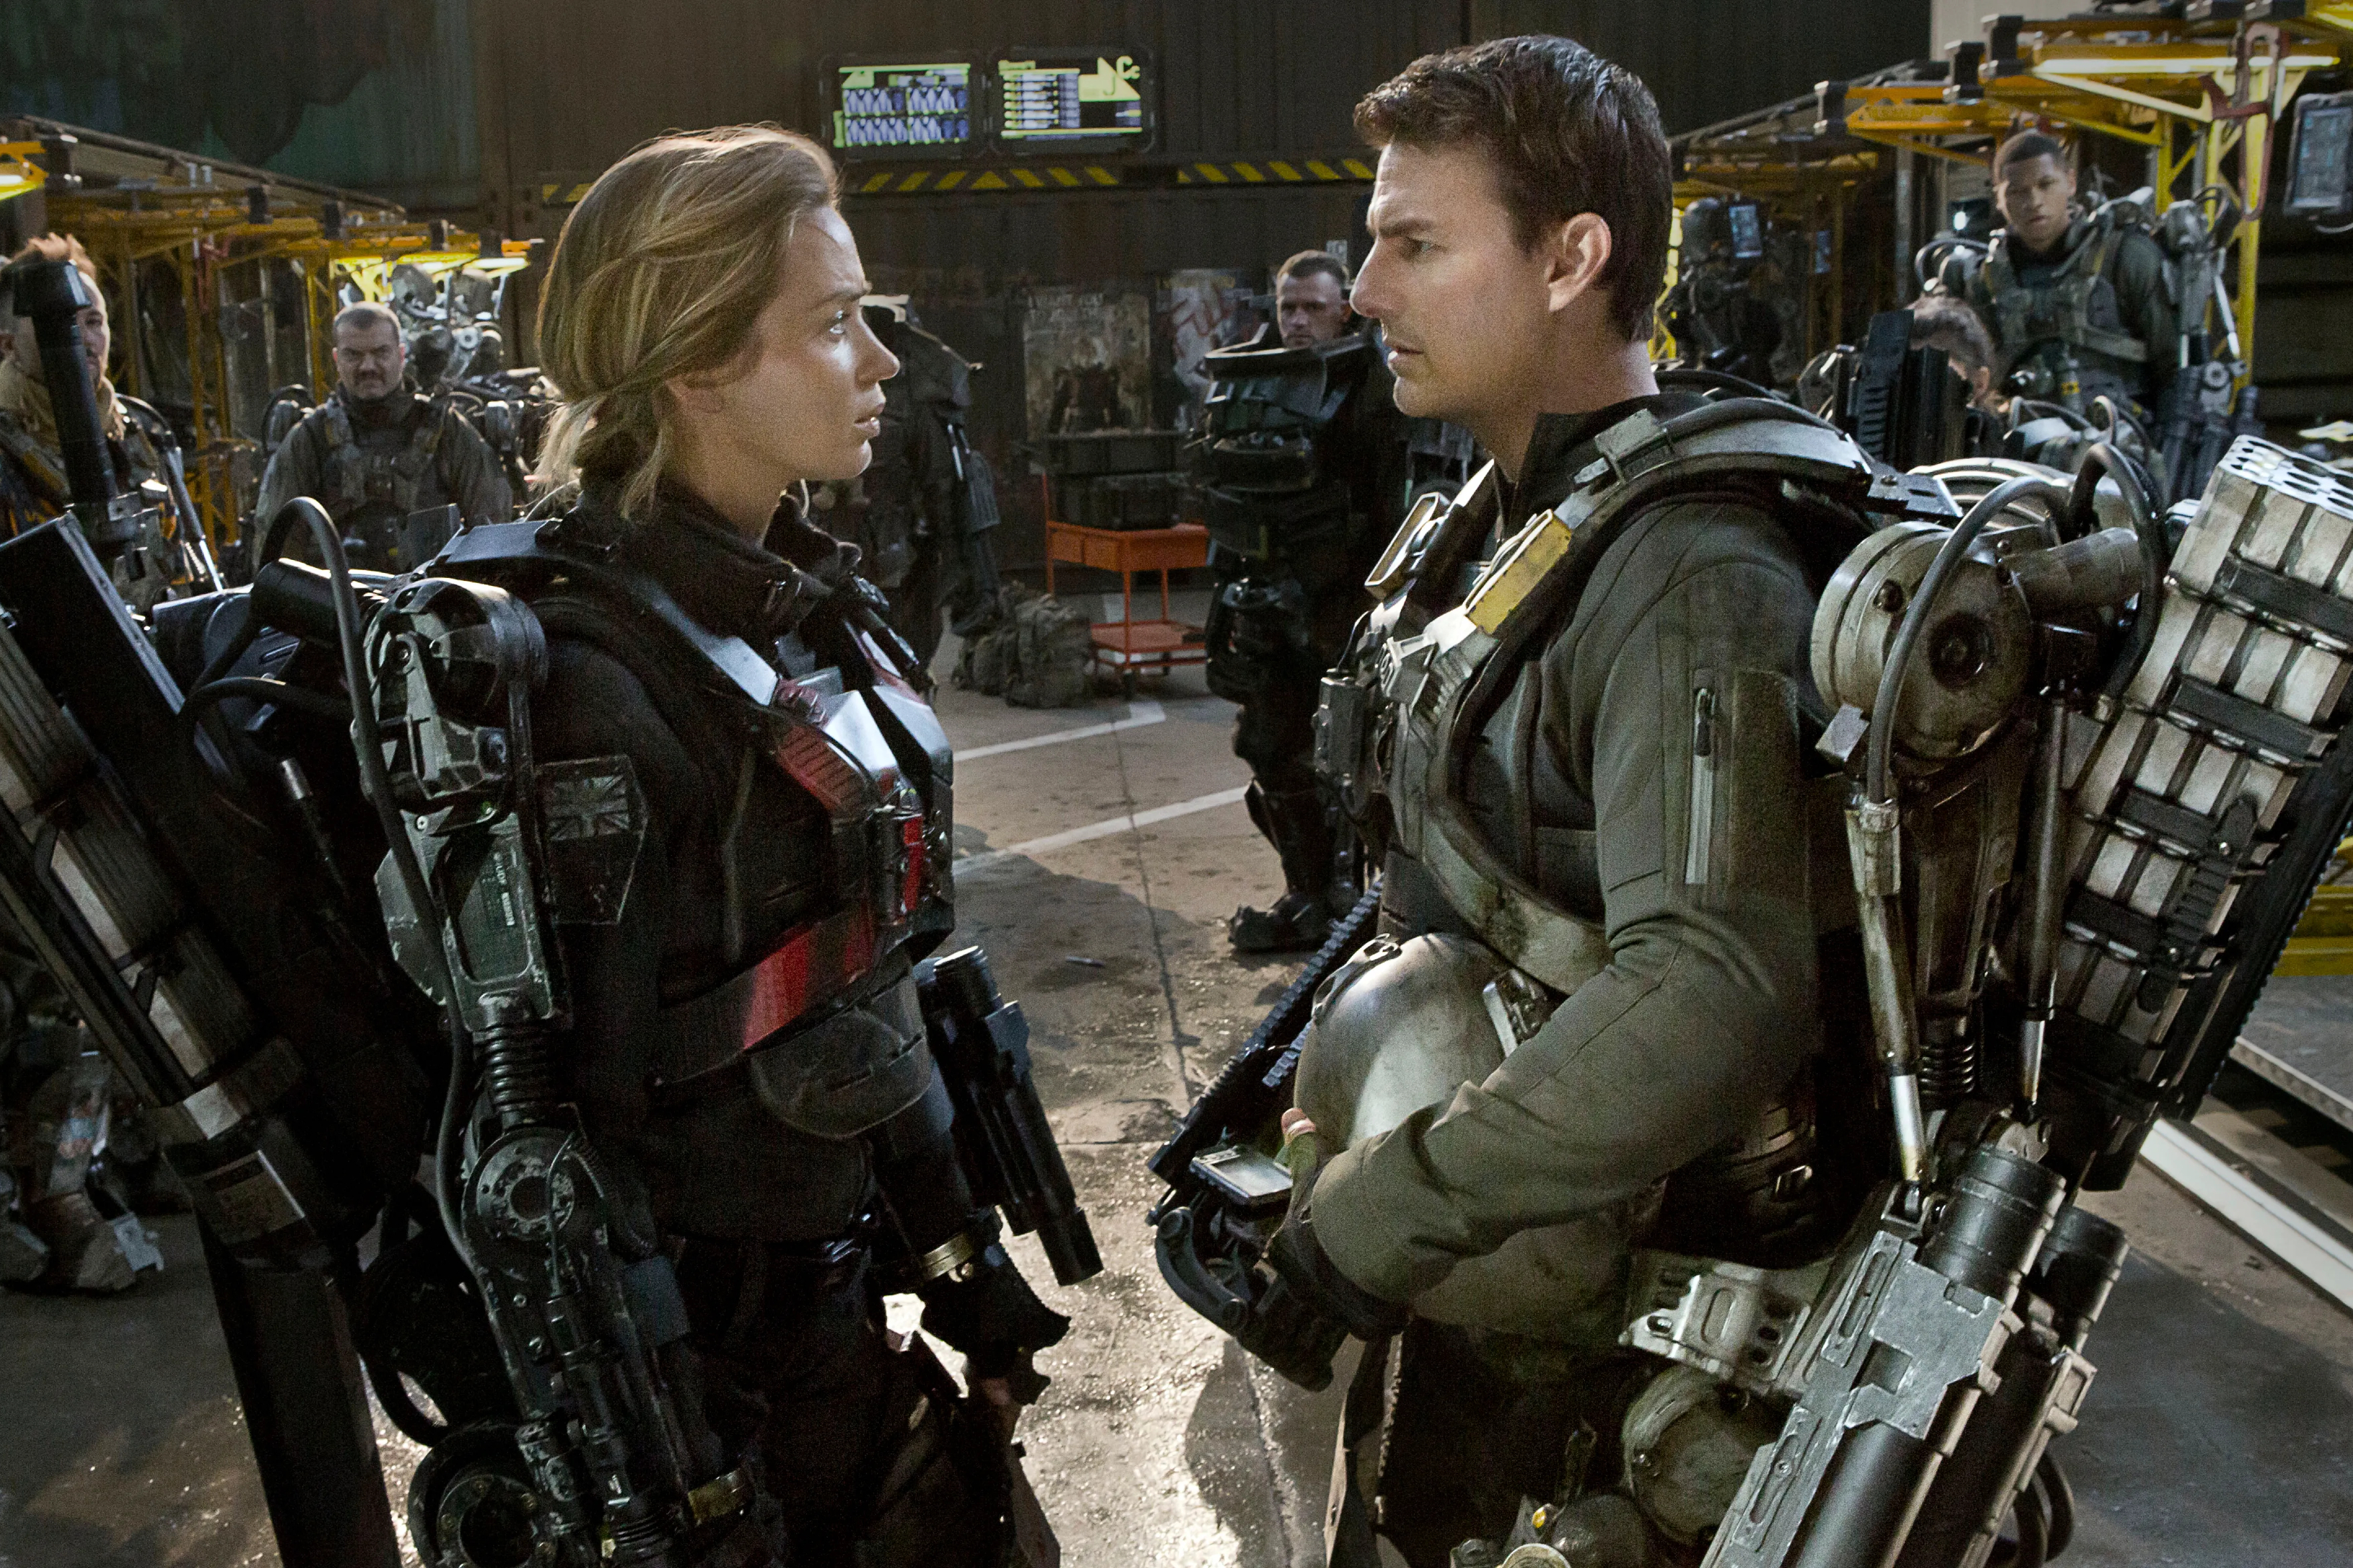 Emily Blunt and Tom Cruise face each other while wearing mech suits in Edge of Tomorrow.